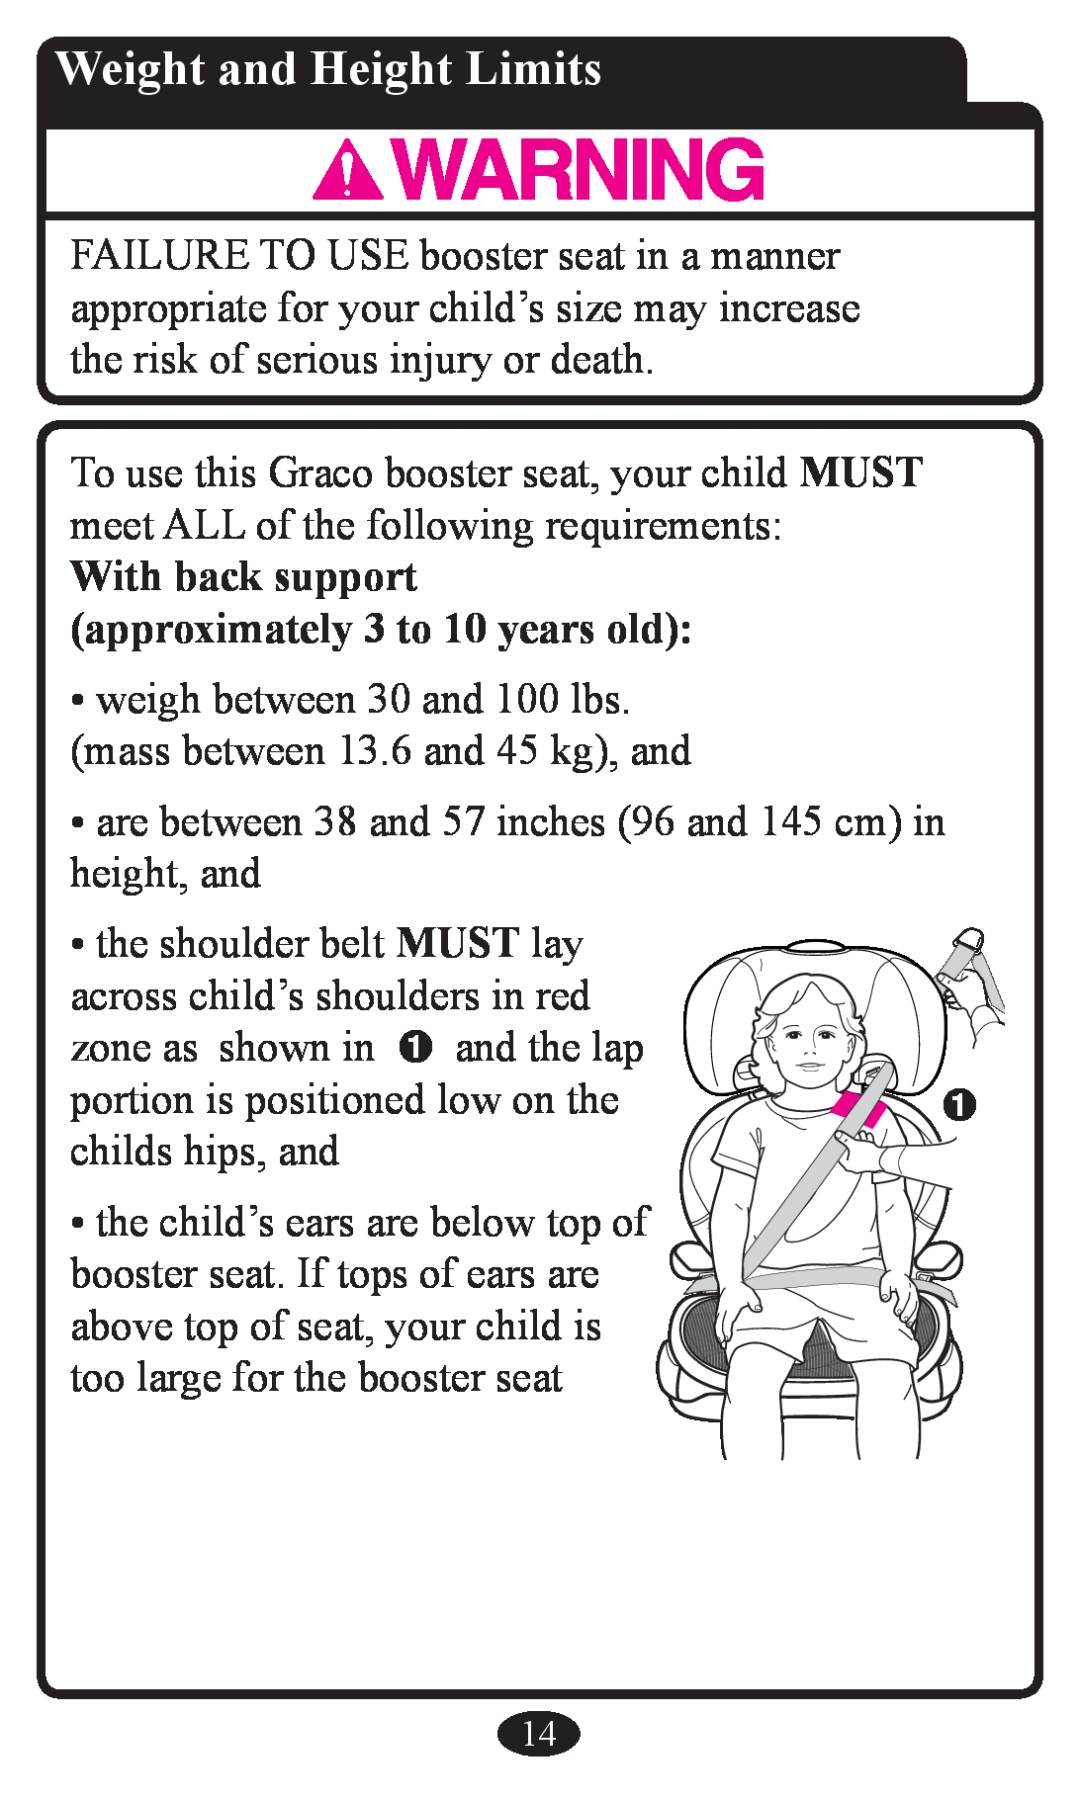 Graco Booster Seat owner manual Weight and Height Limits, With back support approximately 3 to 10 years old 